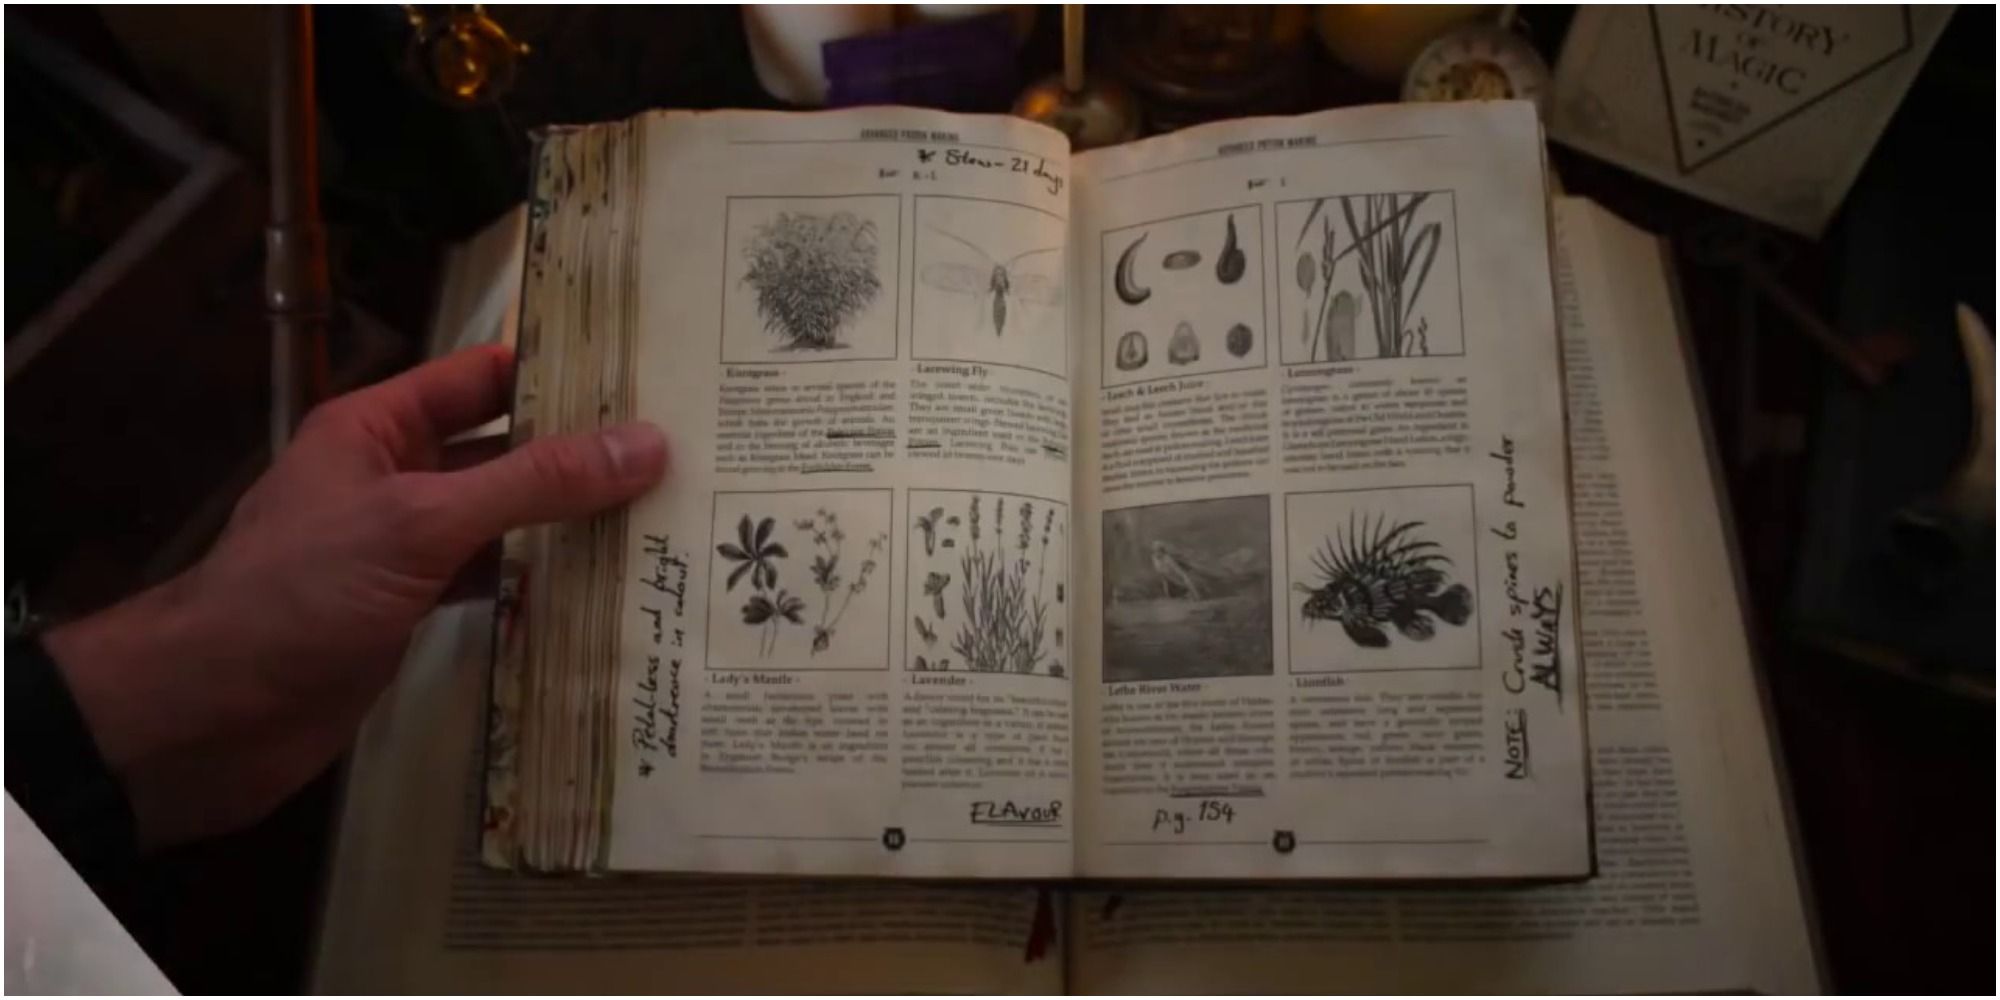 A screenshot of the textbook Advanced Potion-Making from Harry Potter and the Half-Blood Prince